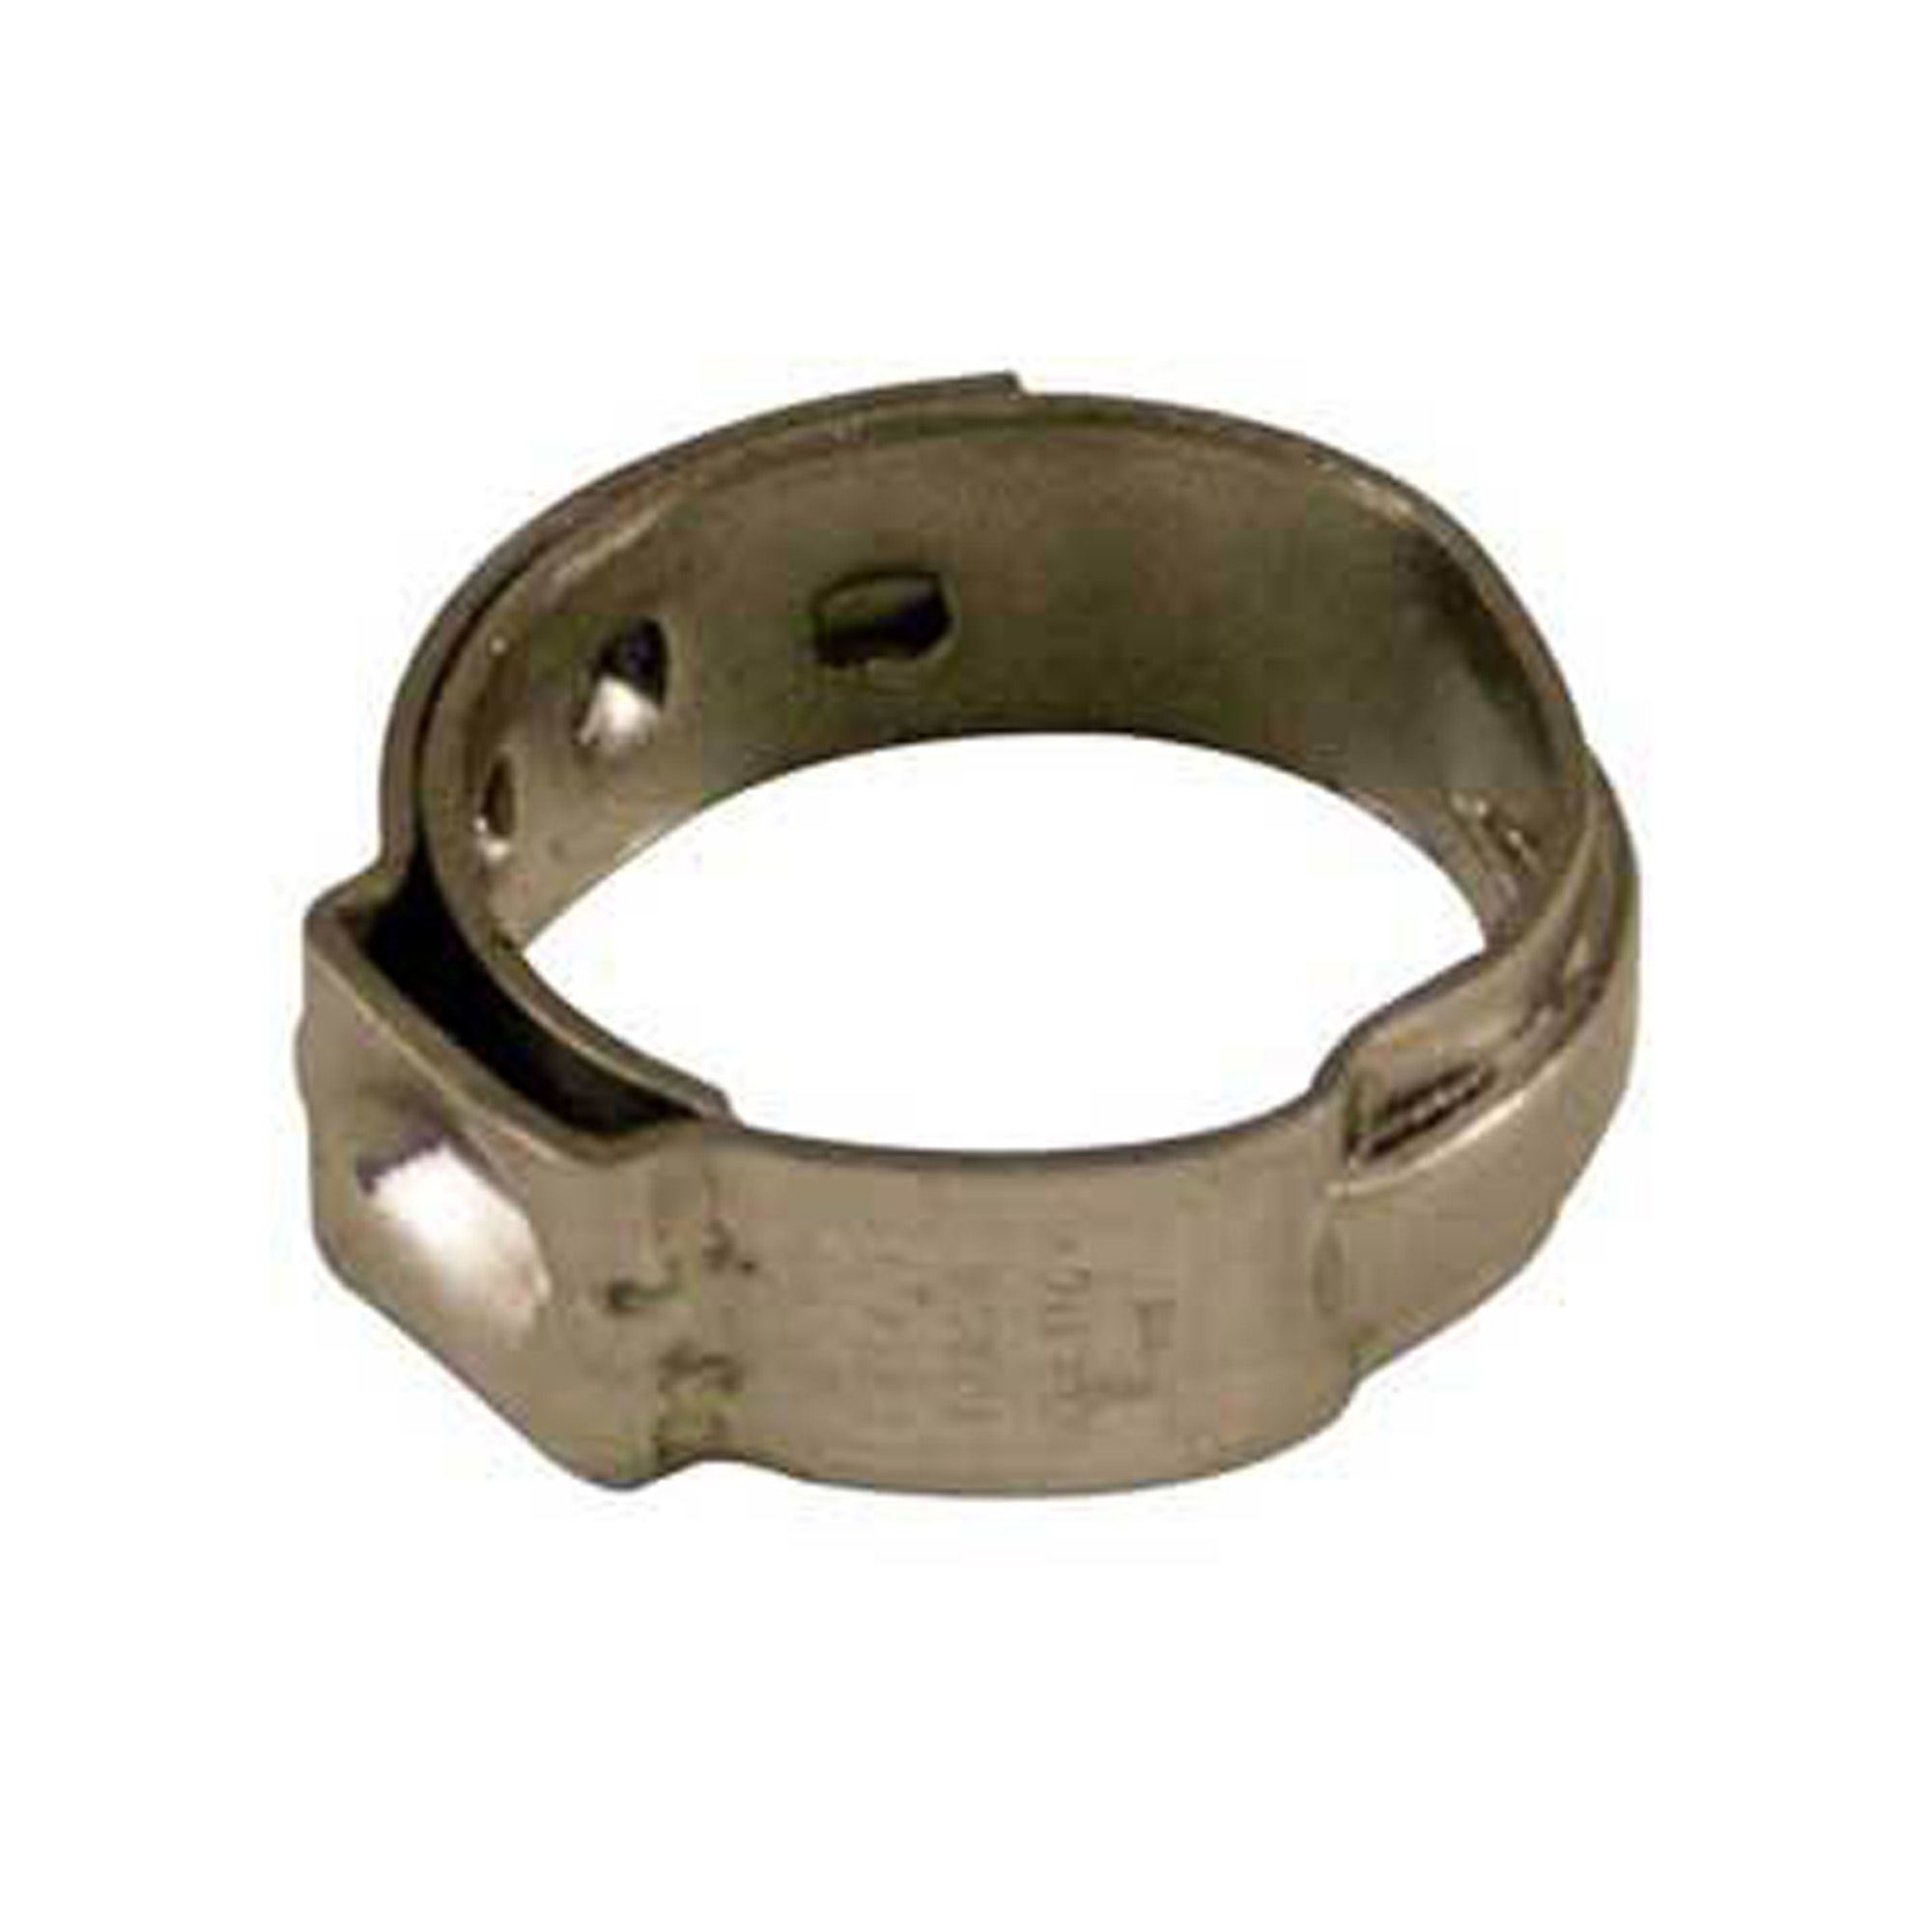 Stainless Steel Strapping, Buckles & Tools – DynaEngineering